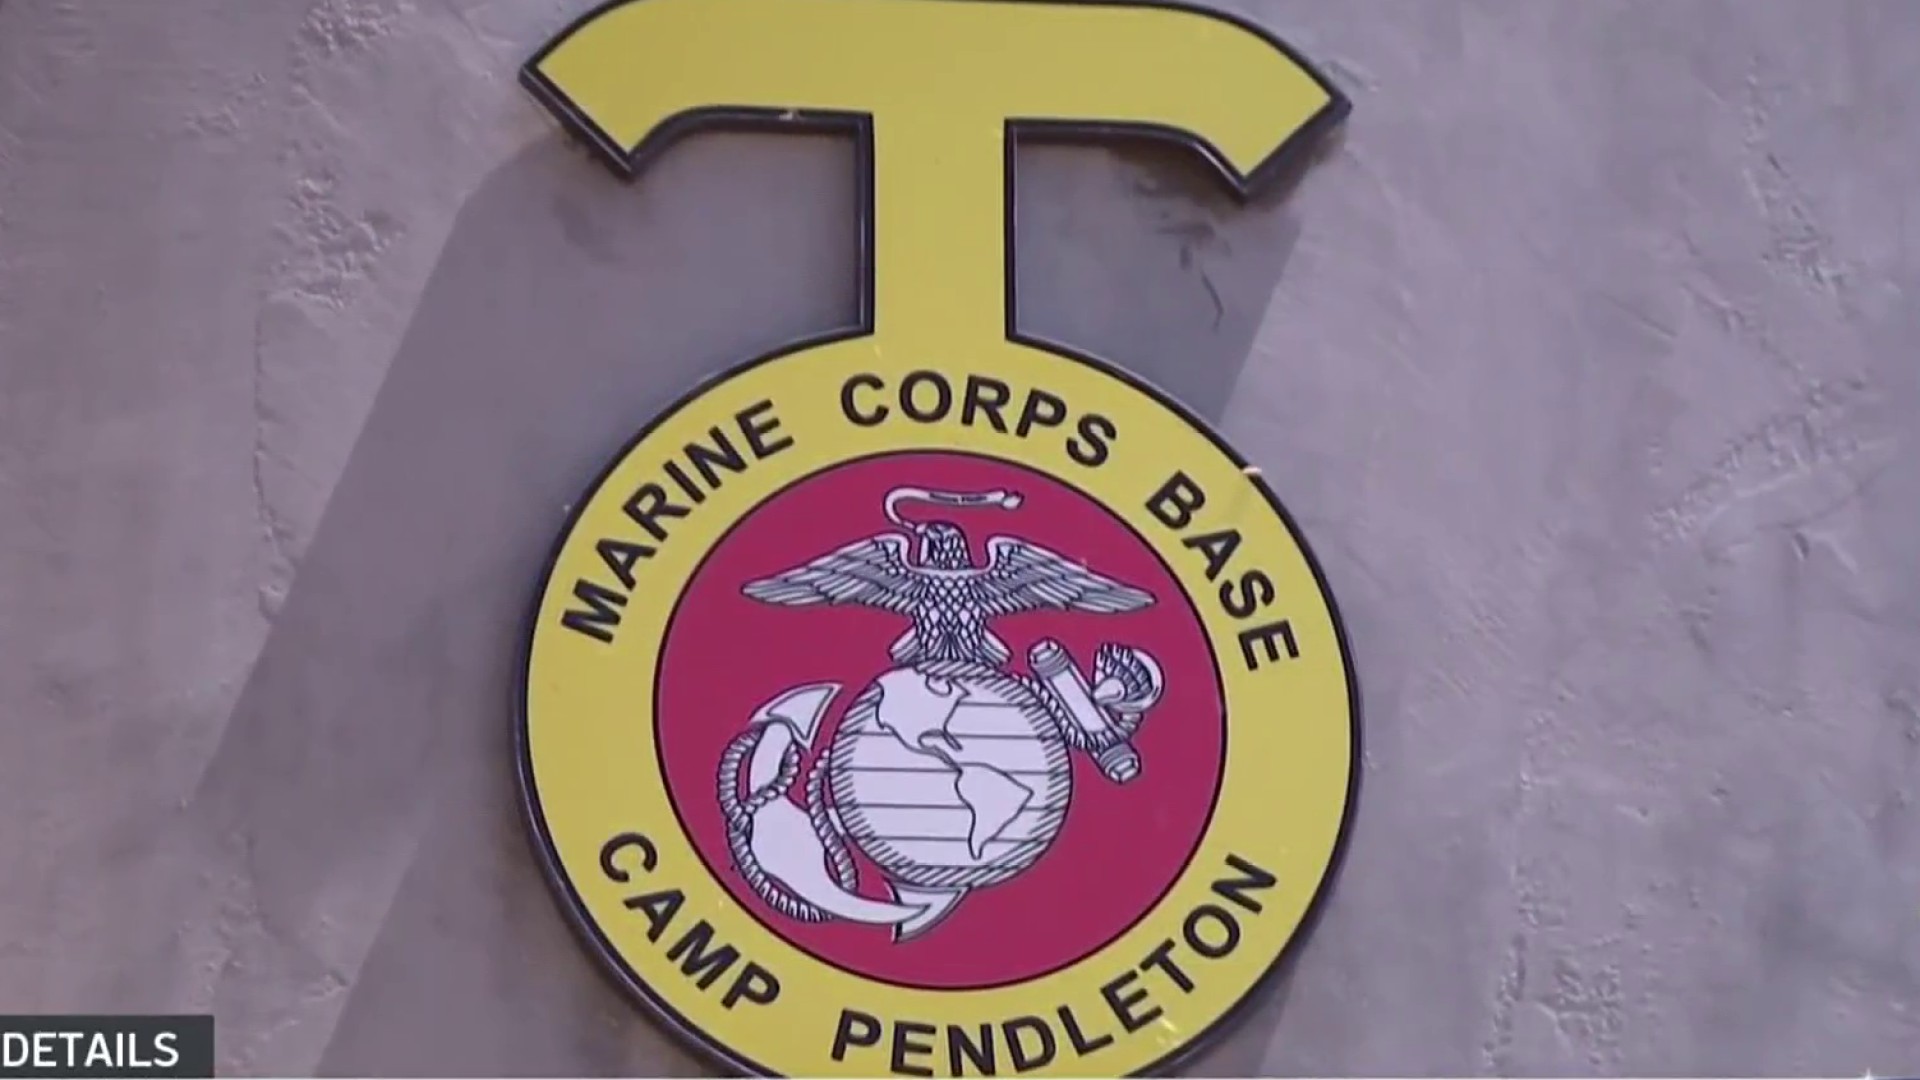 Sex14sex - Camp Pendleton Marine performed sex acts on 14-year-old girl found in  barracks â€“ NBC 7 San Diego